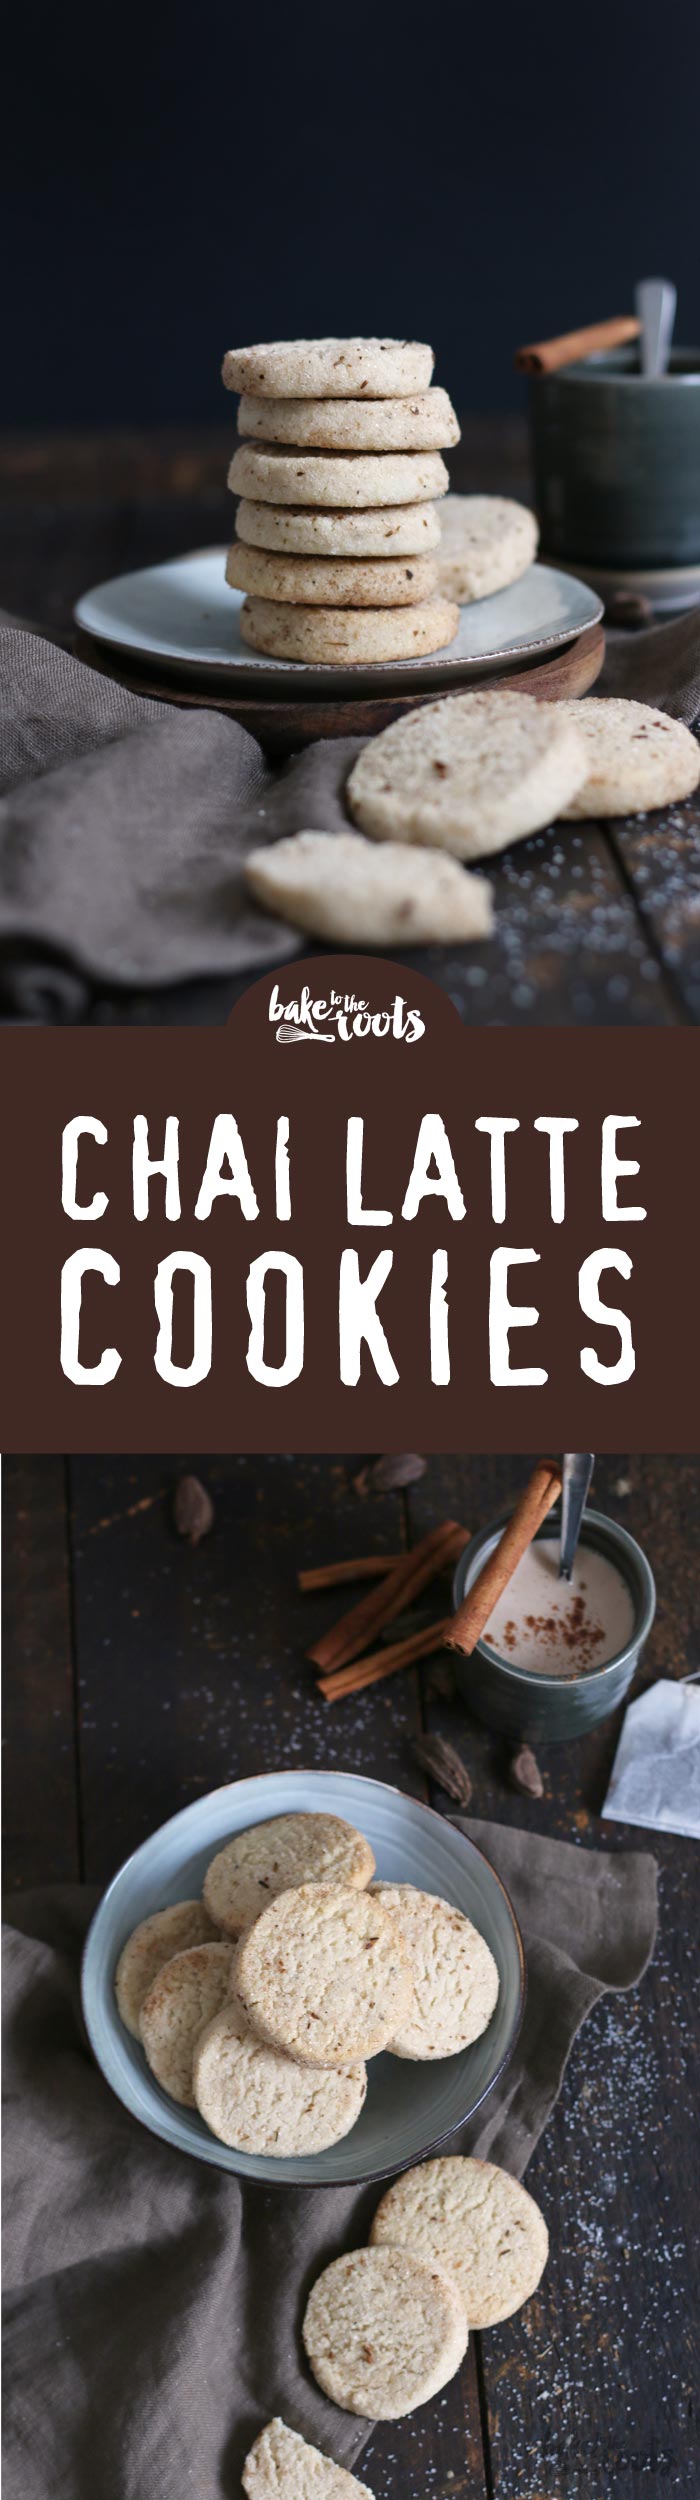 Delicious Chai Latte Cookies | Bake to the roots